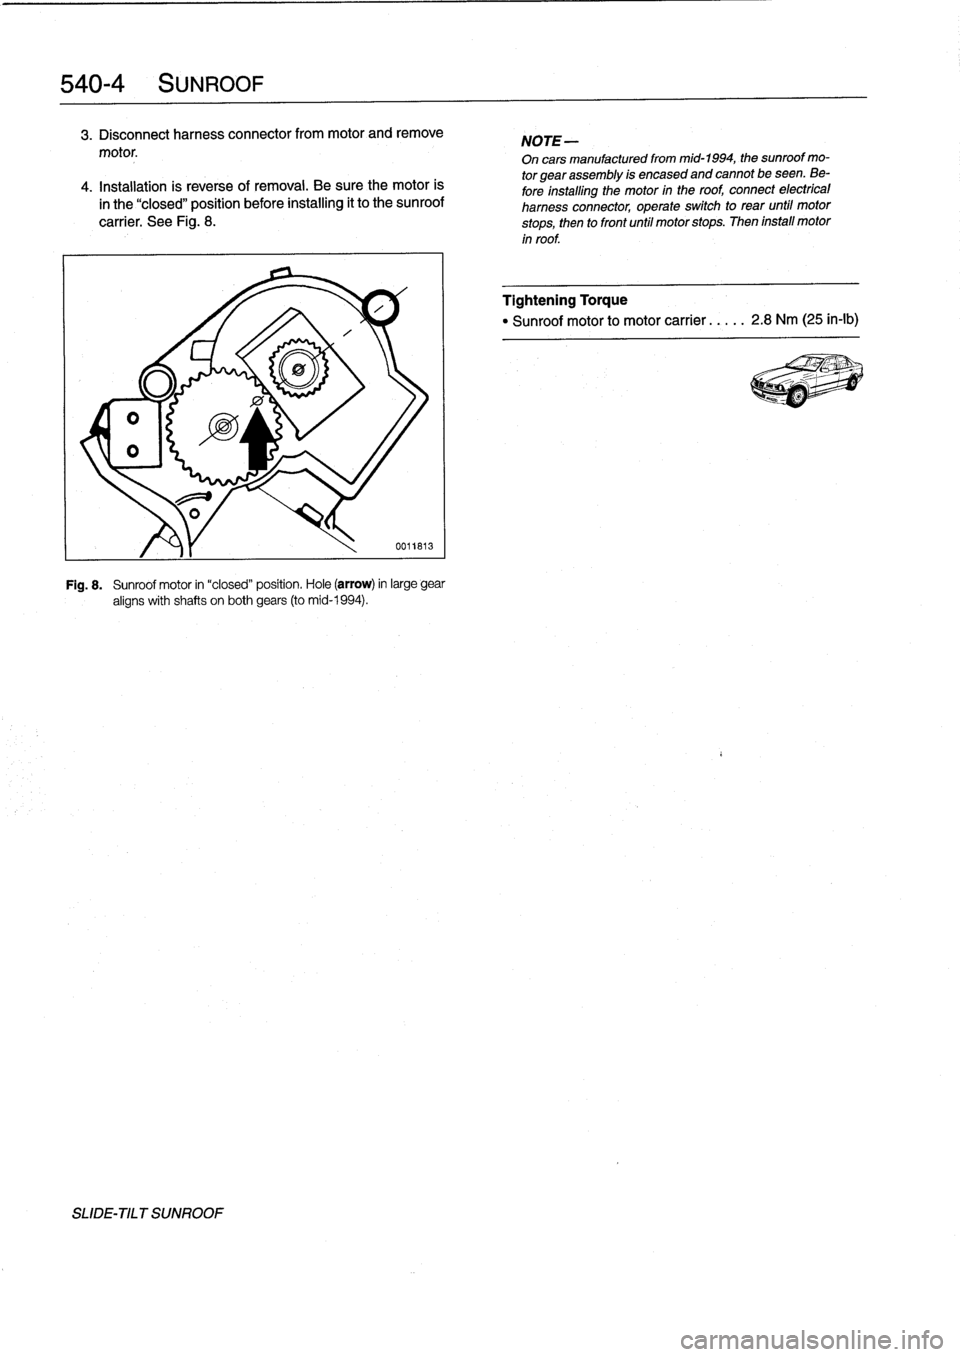 BMW 323i 1993 E36 Workshop Manual 
540-
4
SUNROOF

3
.
Disconnect
harness
connector
from
motor
and
remove

motor
.

4
.
Installation
is
reverse
of
removal
.
Be
sure
the
motor
is
in
the
"closed"
position
before
installing
it
to
the
sun